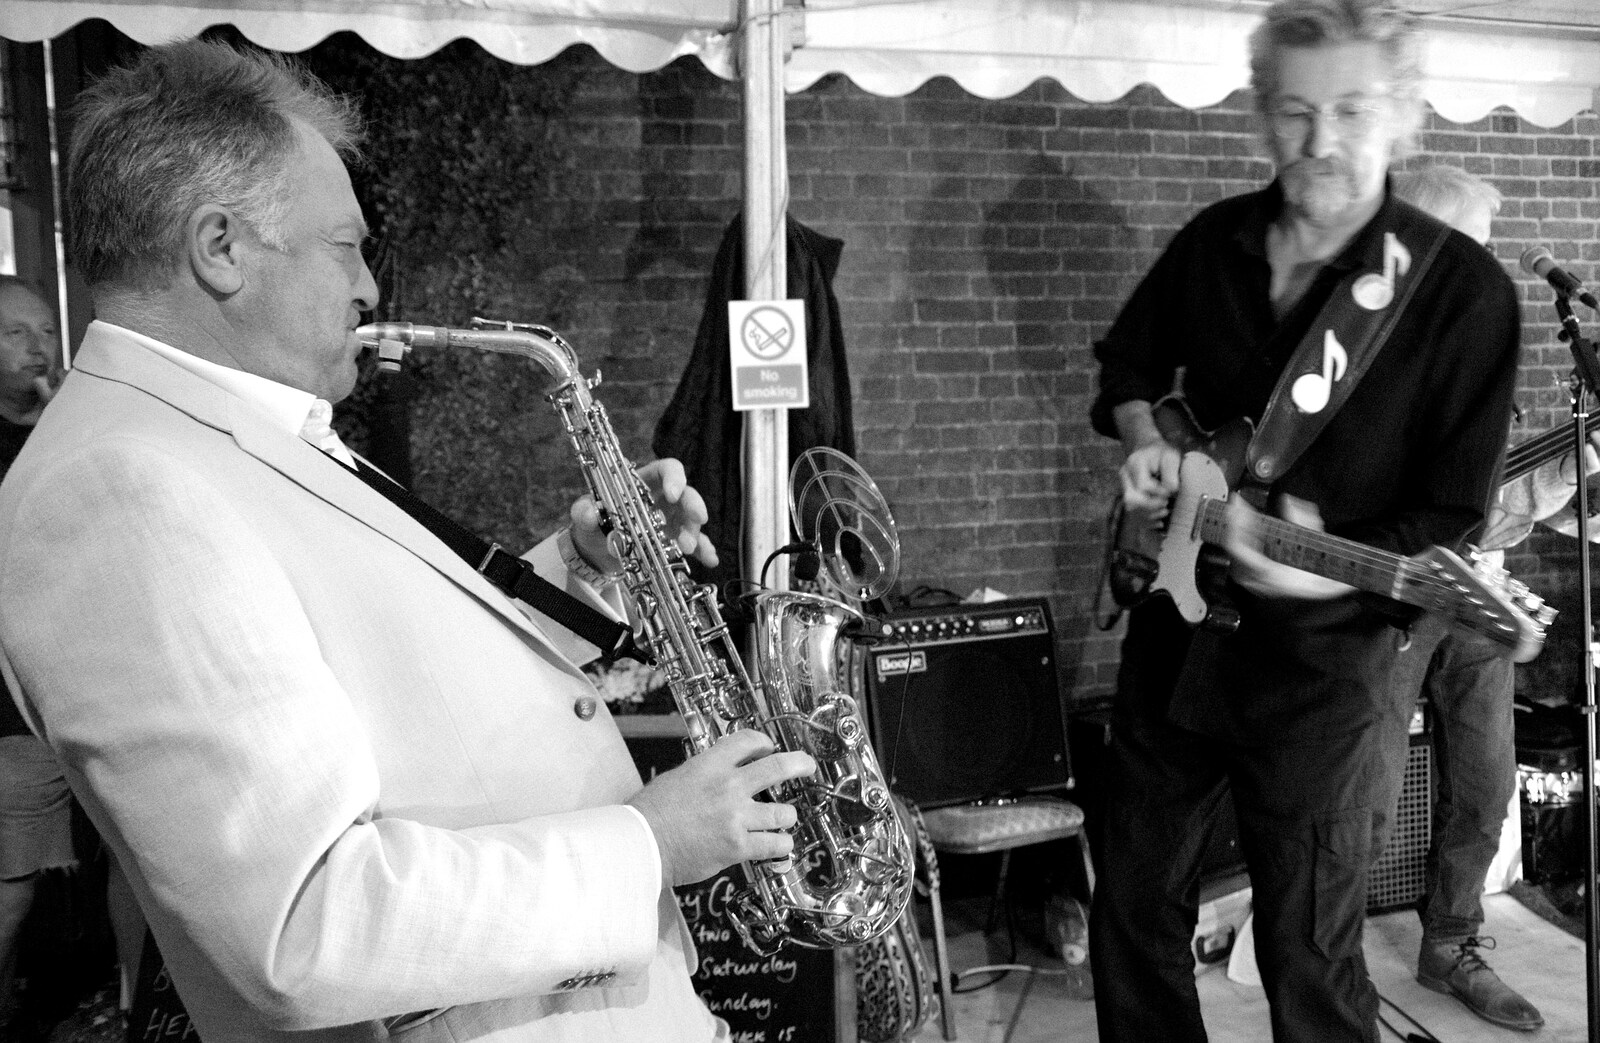 The sax player returns from a tour of the audience from The Shakesbeer Festival, Star Wing Brewery, Redgrave, Suffolk - 13th July 2019